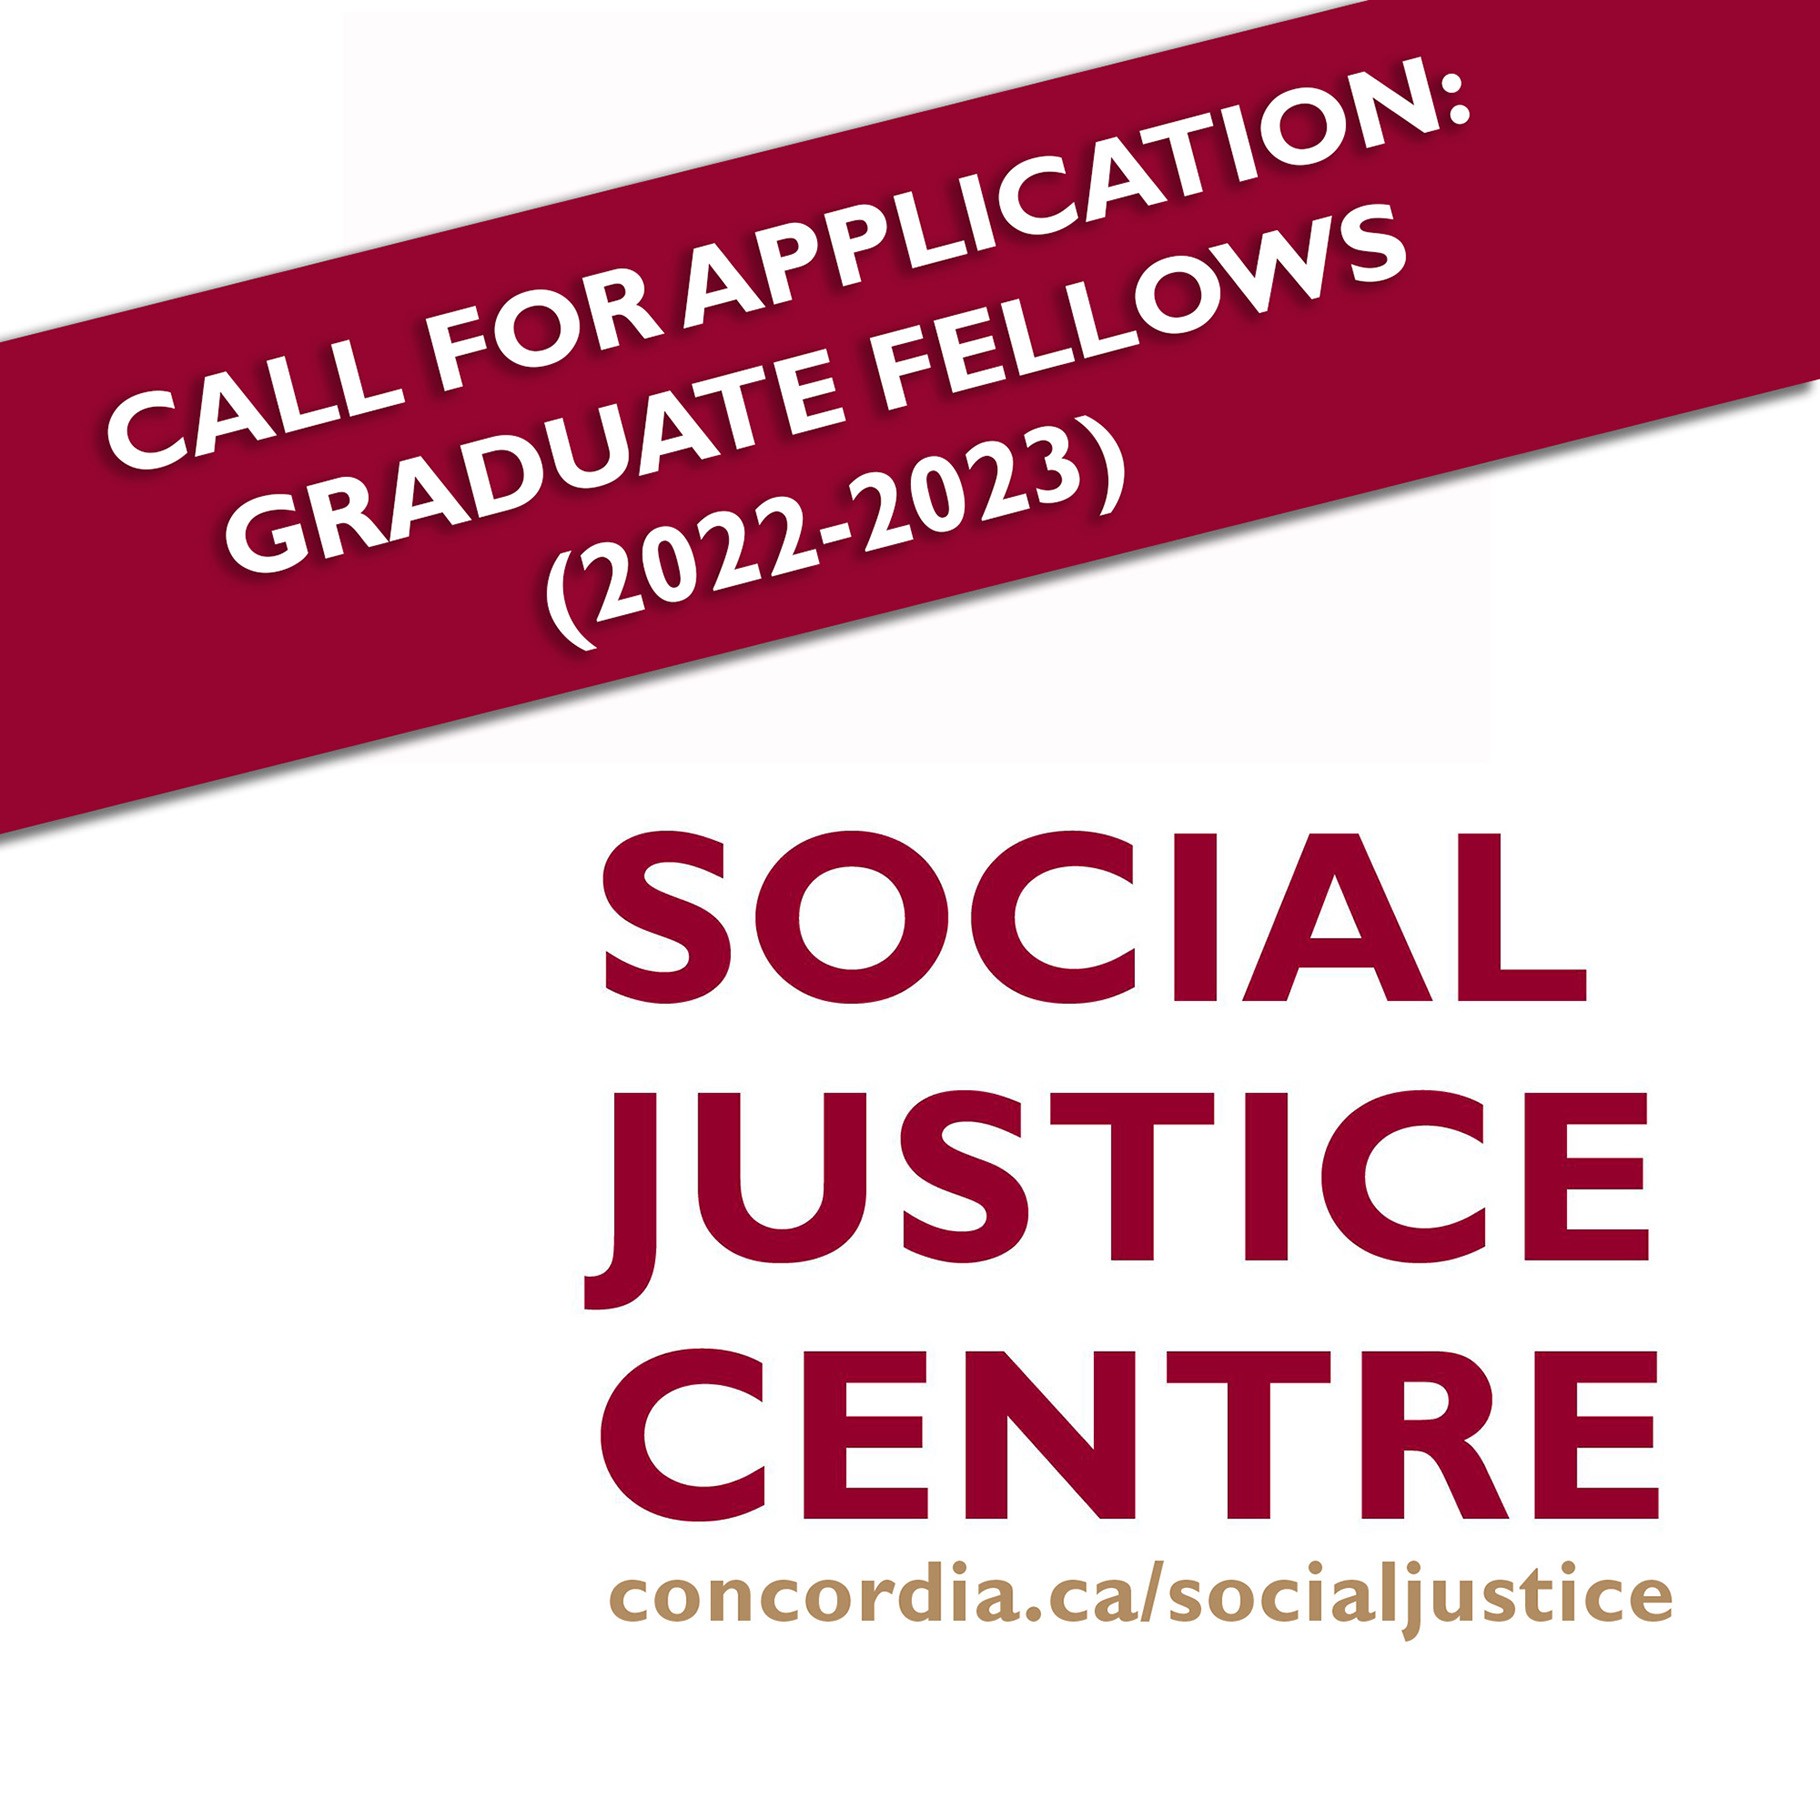 Call for applications Graduate Fellowships